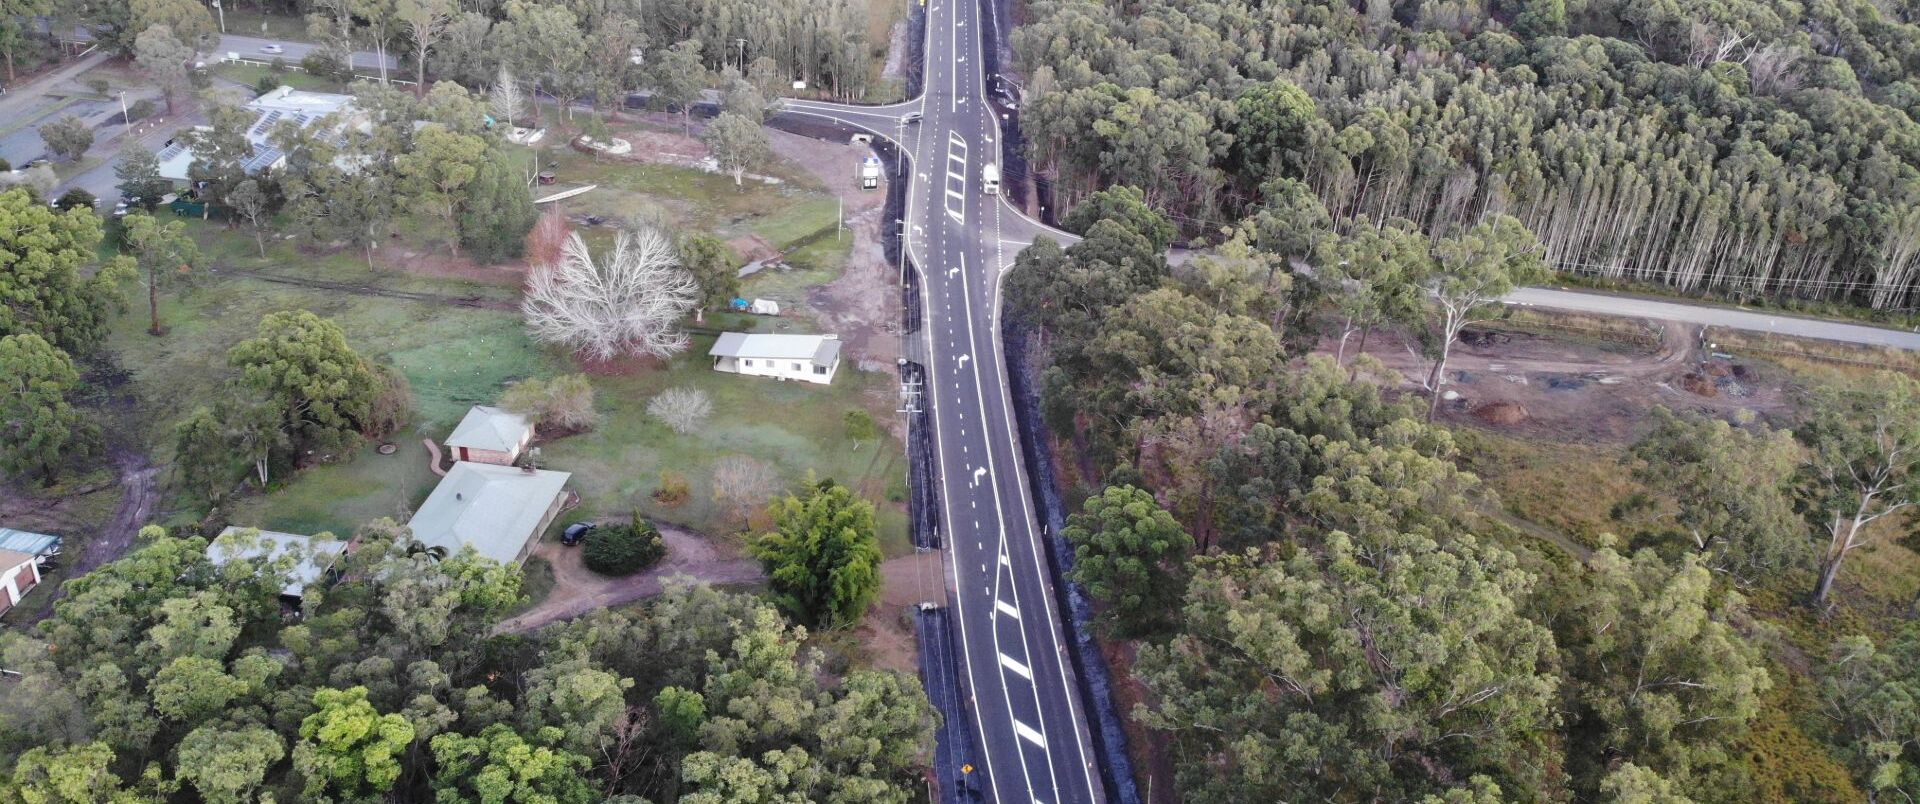 Saltwater Intersection Upgrade